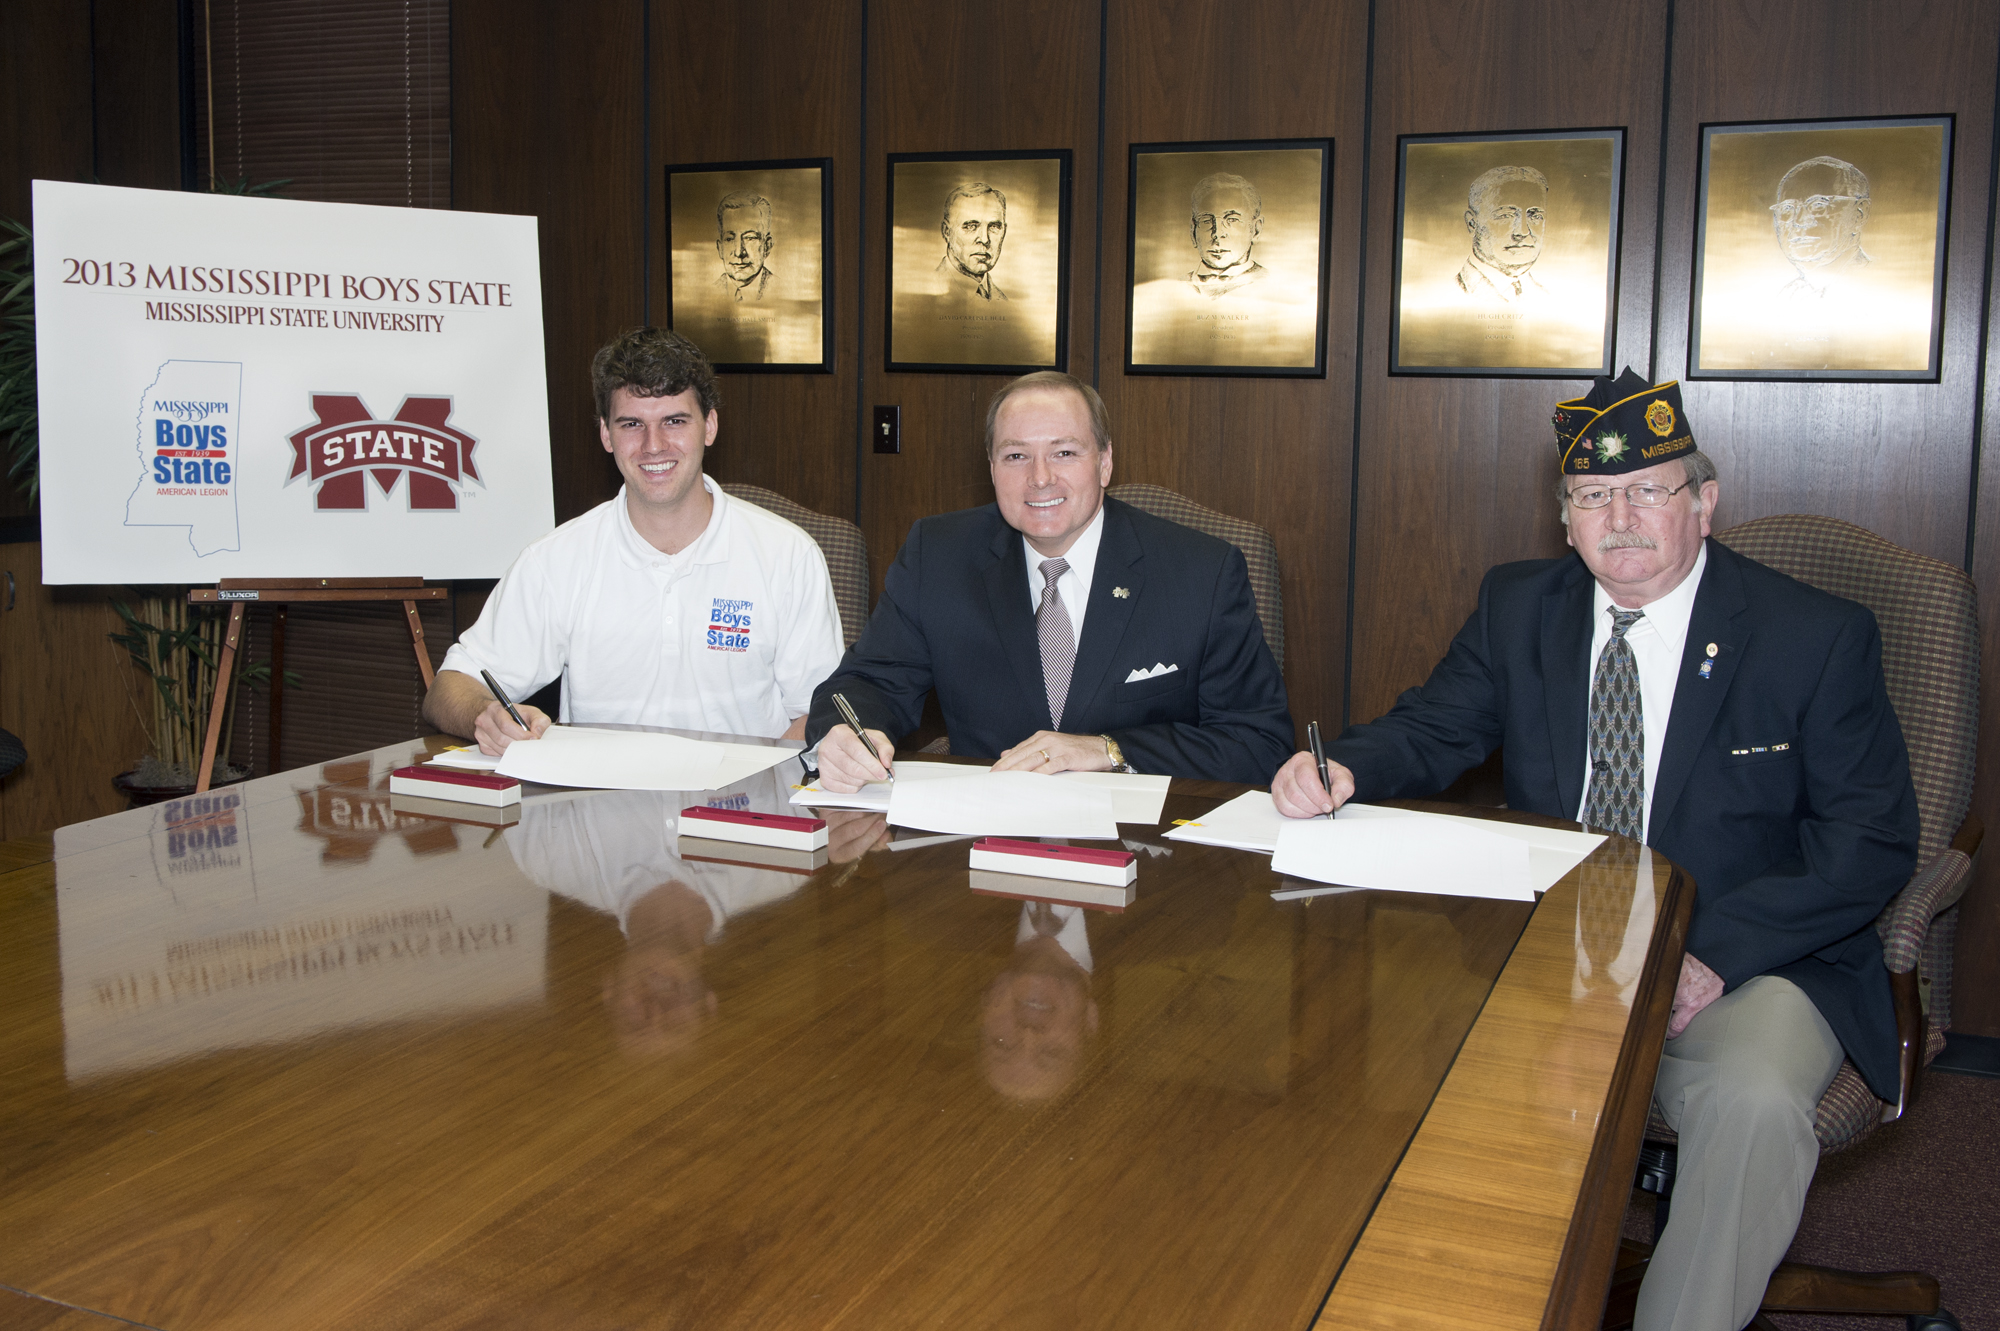 Mississippi State University has been selected as the 2013-15 host campus for Mississippi's American Legion Boys State program. Sponsored by the American Legion, Boys State is the nation's premier program for teaching how government works while developing leadership skills and an appreciation for the rights and responsibilities of citizenship. Boys State Director Neal Boone, left, MSU President Mark E. Keenum, center, and Boys State Chairman Donald Cabrol of the American Legion signed the three-year agreement Wednesday morning. About 350 young men from across the state will gather on the MSU Starkville Campus this summer to learn about state and local government and the electoral process. 